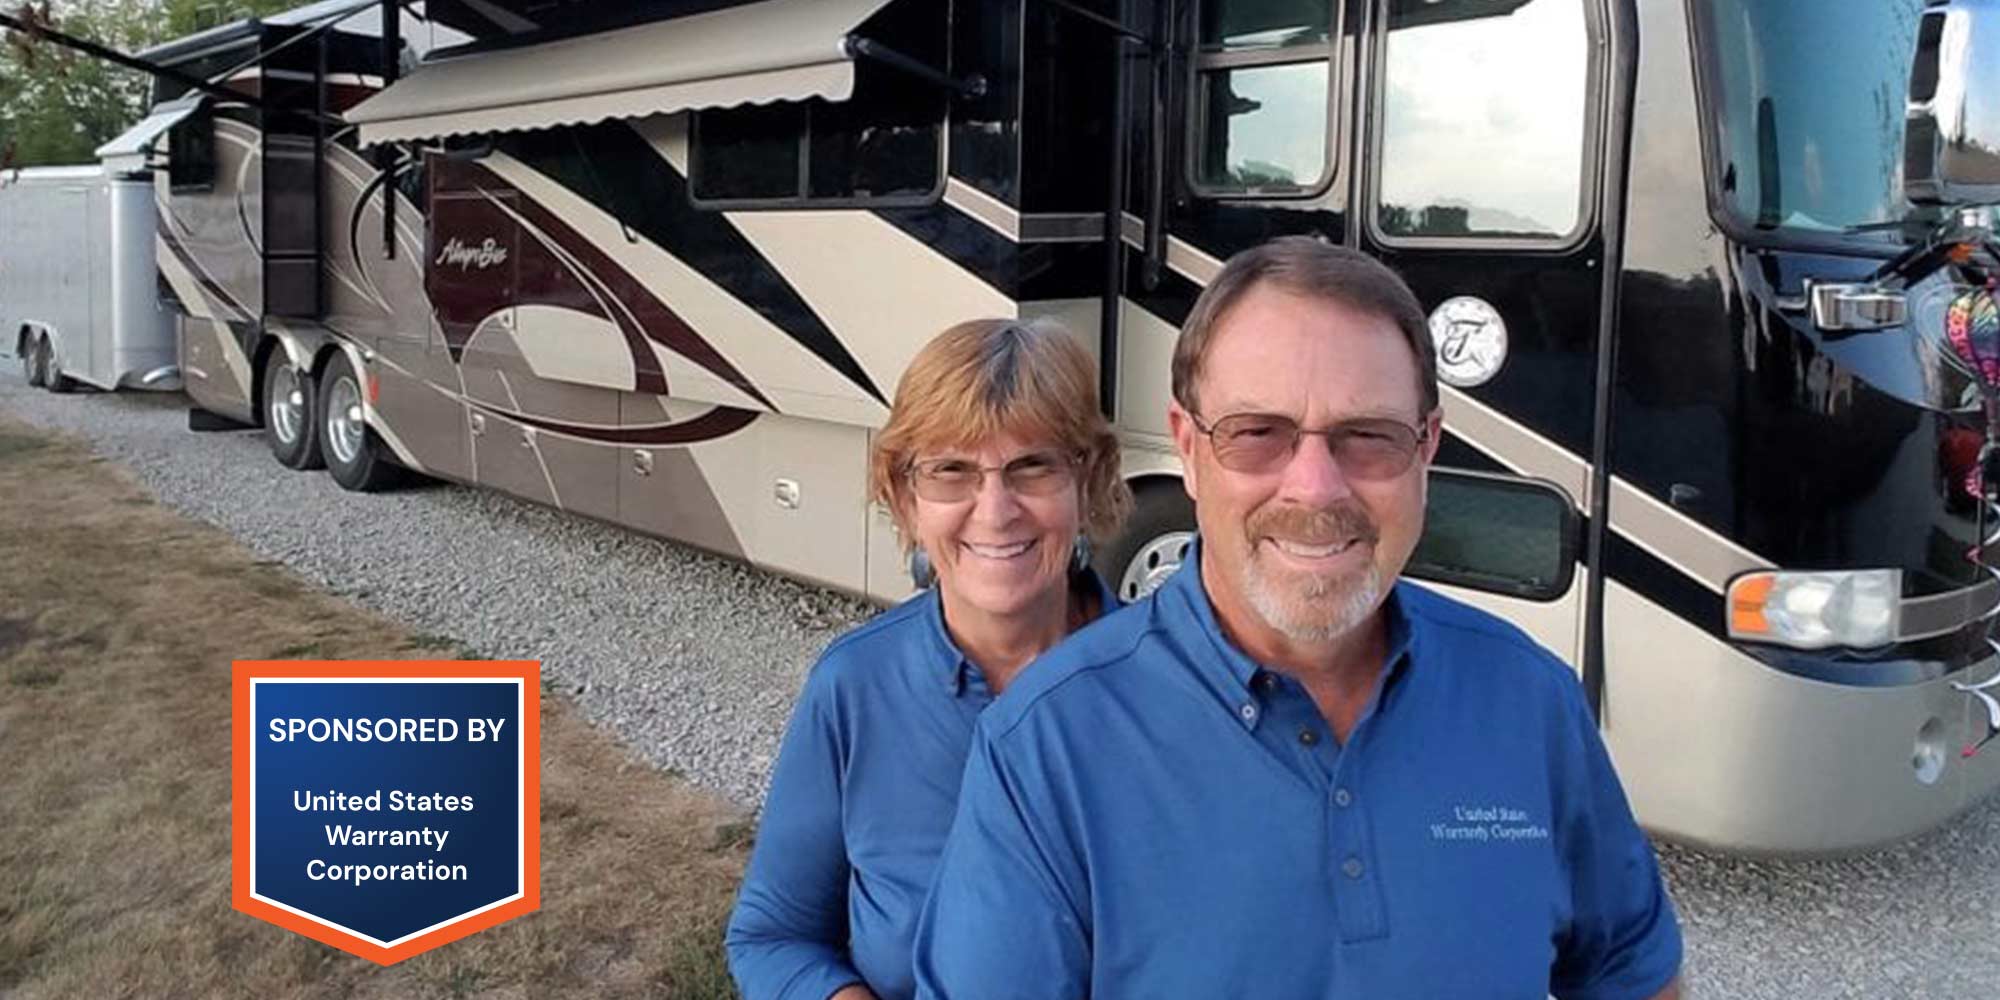 Travel with Peace of Mind featured image of a happy couple by their RV